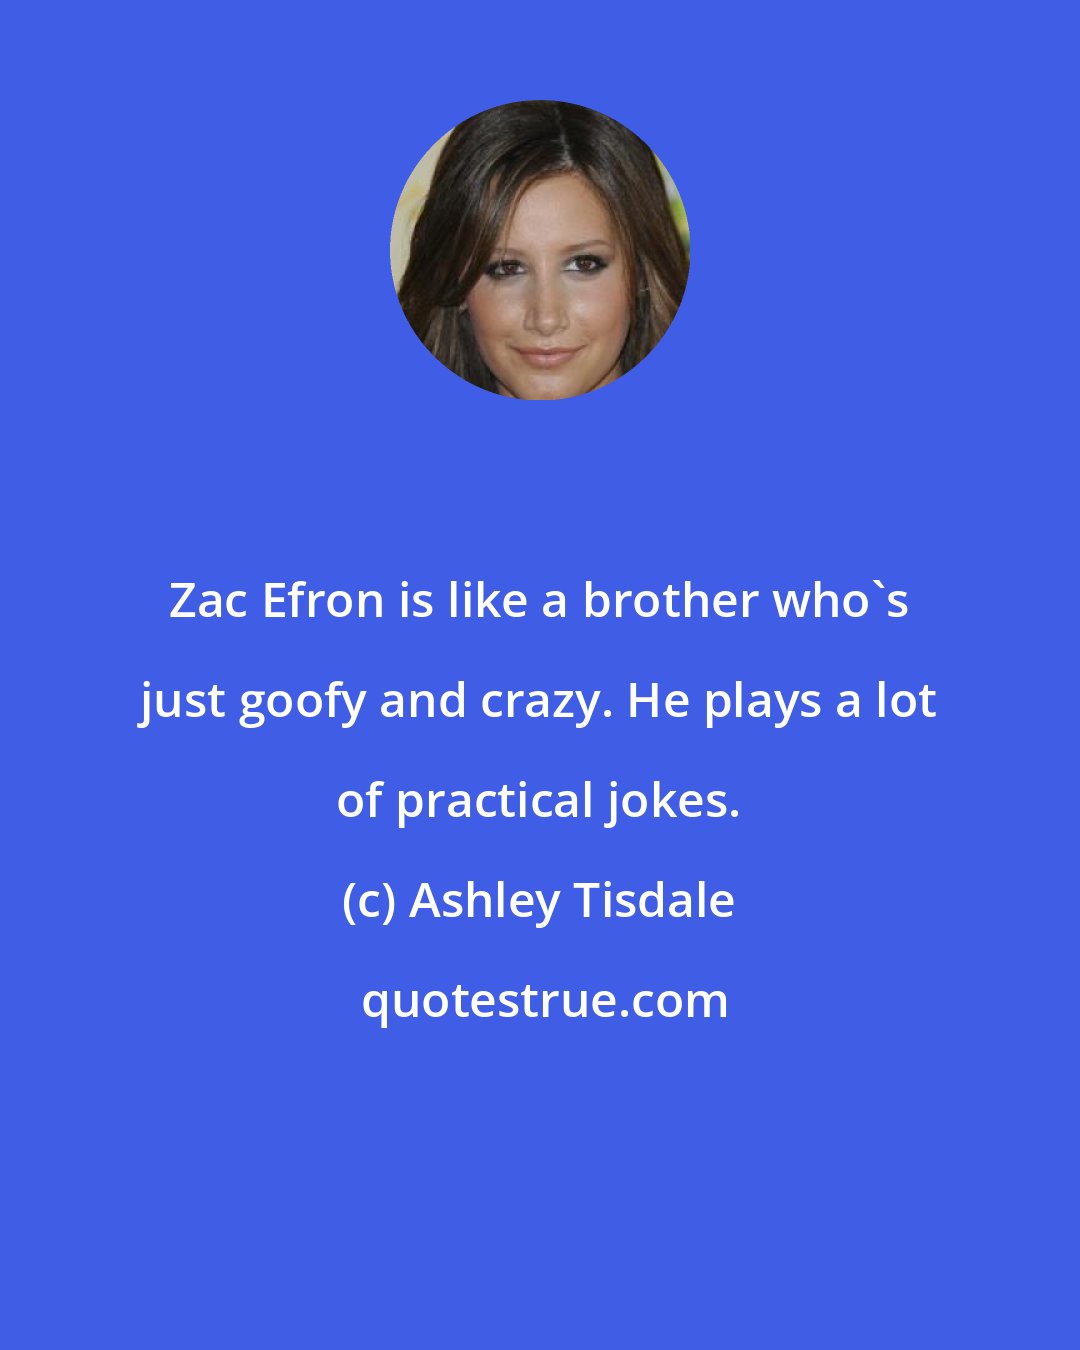 Ashley Tisdale: Zac Efron is like a brother who's just goofy and crazy. He plays a lot of practical jokes.